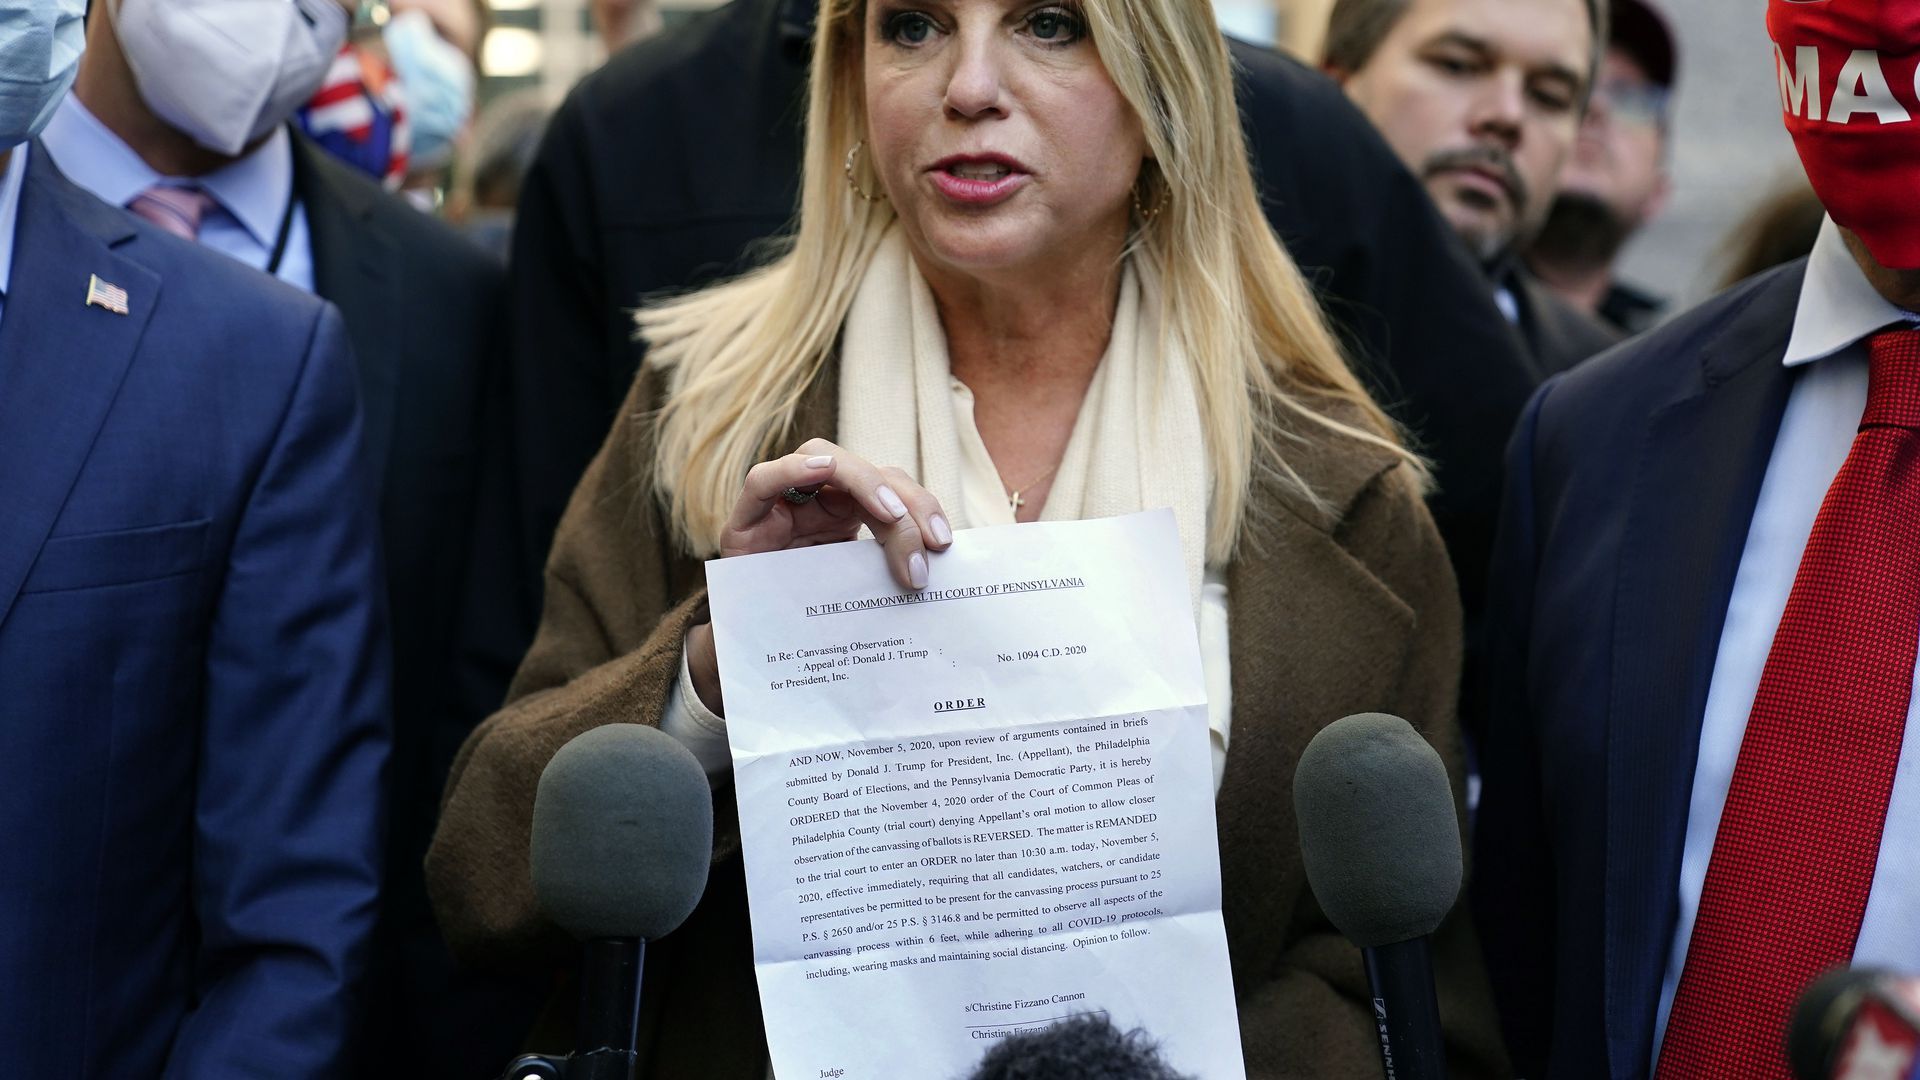 A blonde woman holds a sheet of paper in front of two microphones, with a crowd standing around her mostly of men wearing suits